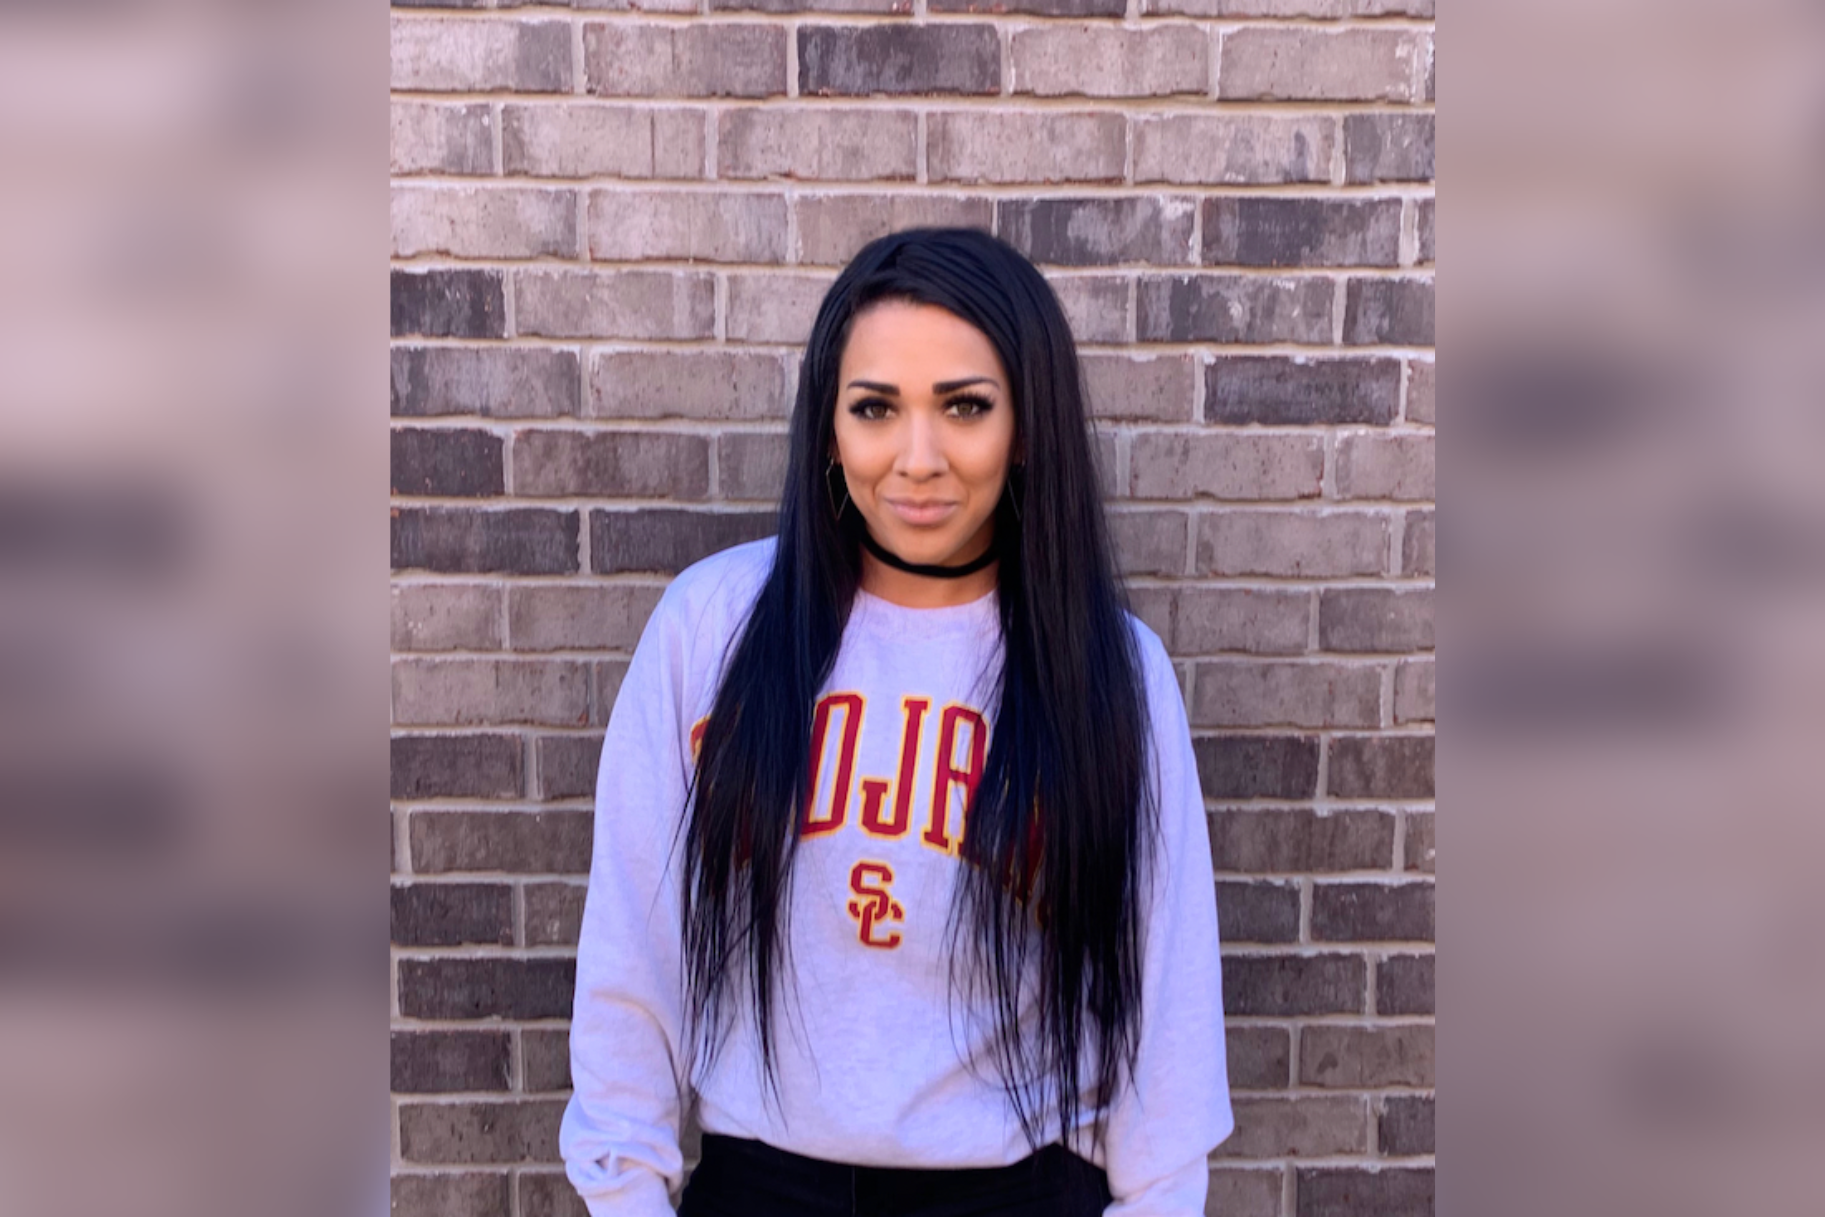 Veronica Frazier Online MPA USC Price Student stands against brick wall in USC Trojans sweatshirt